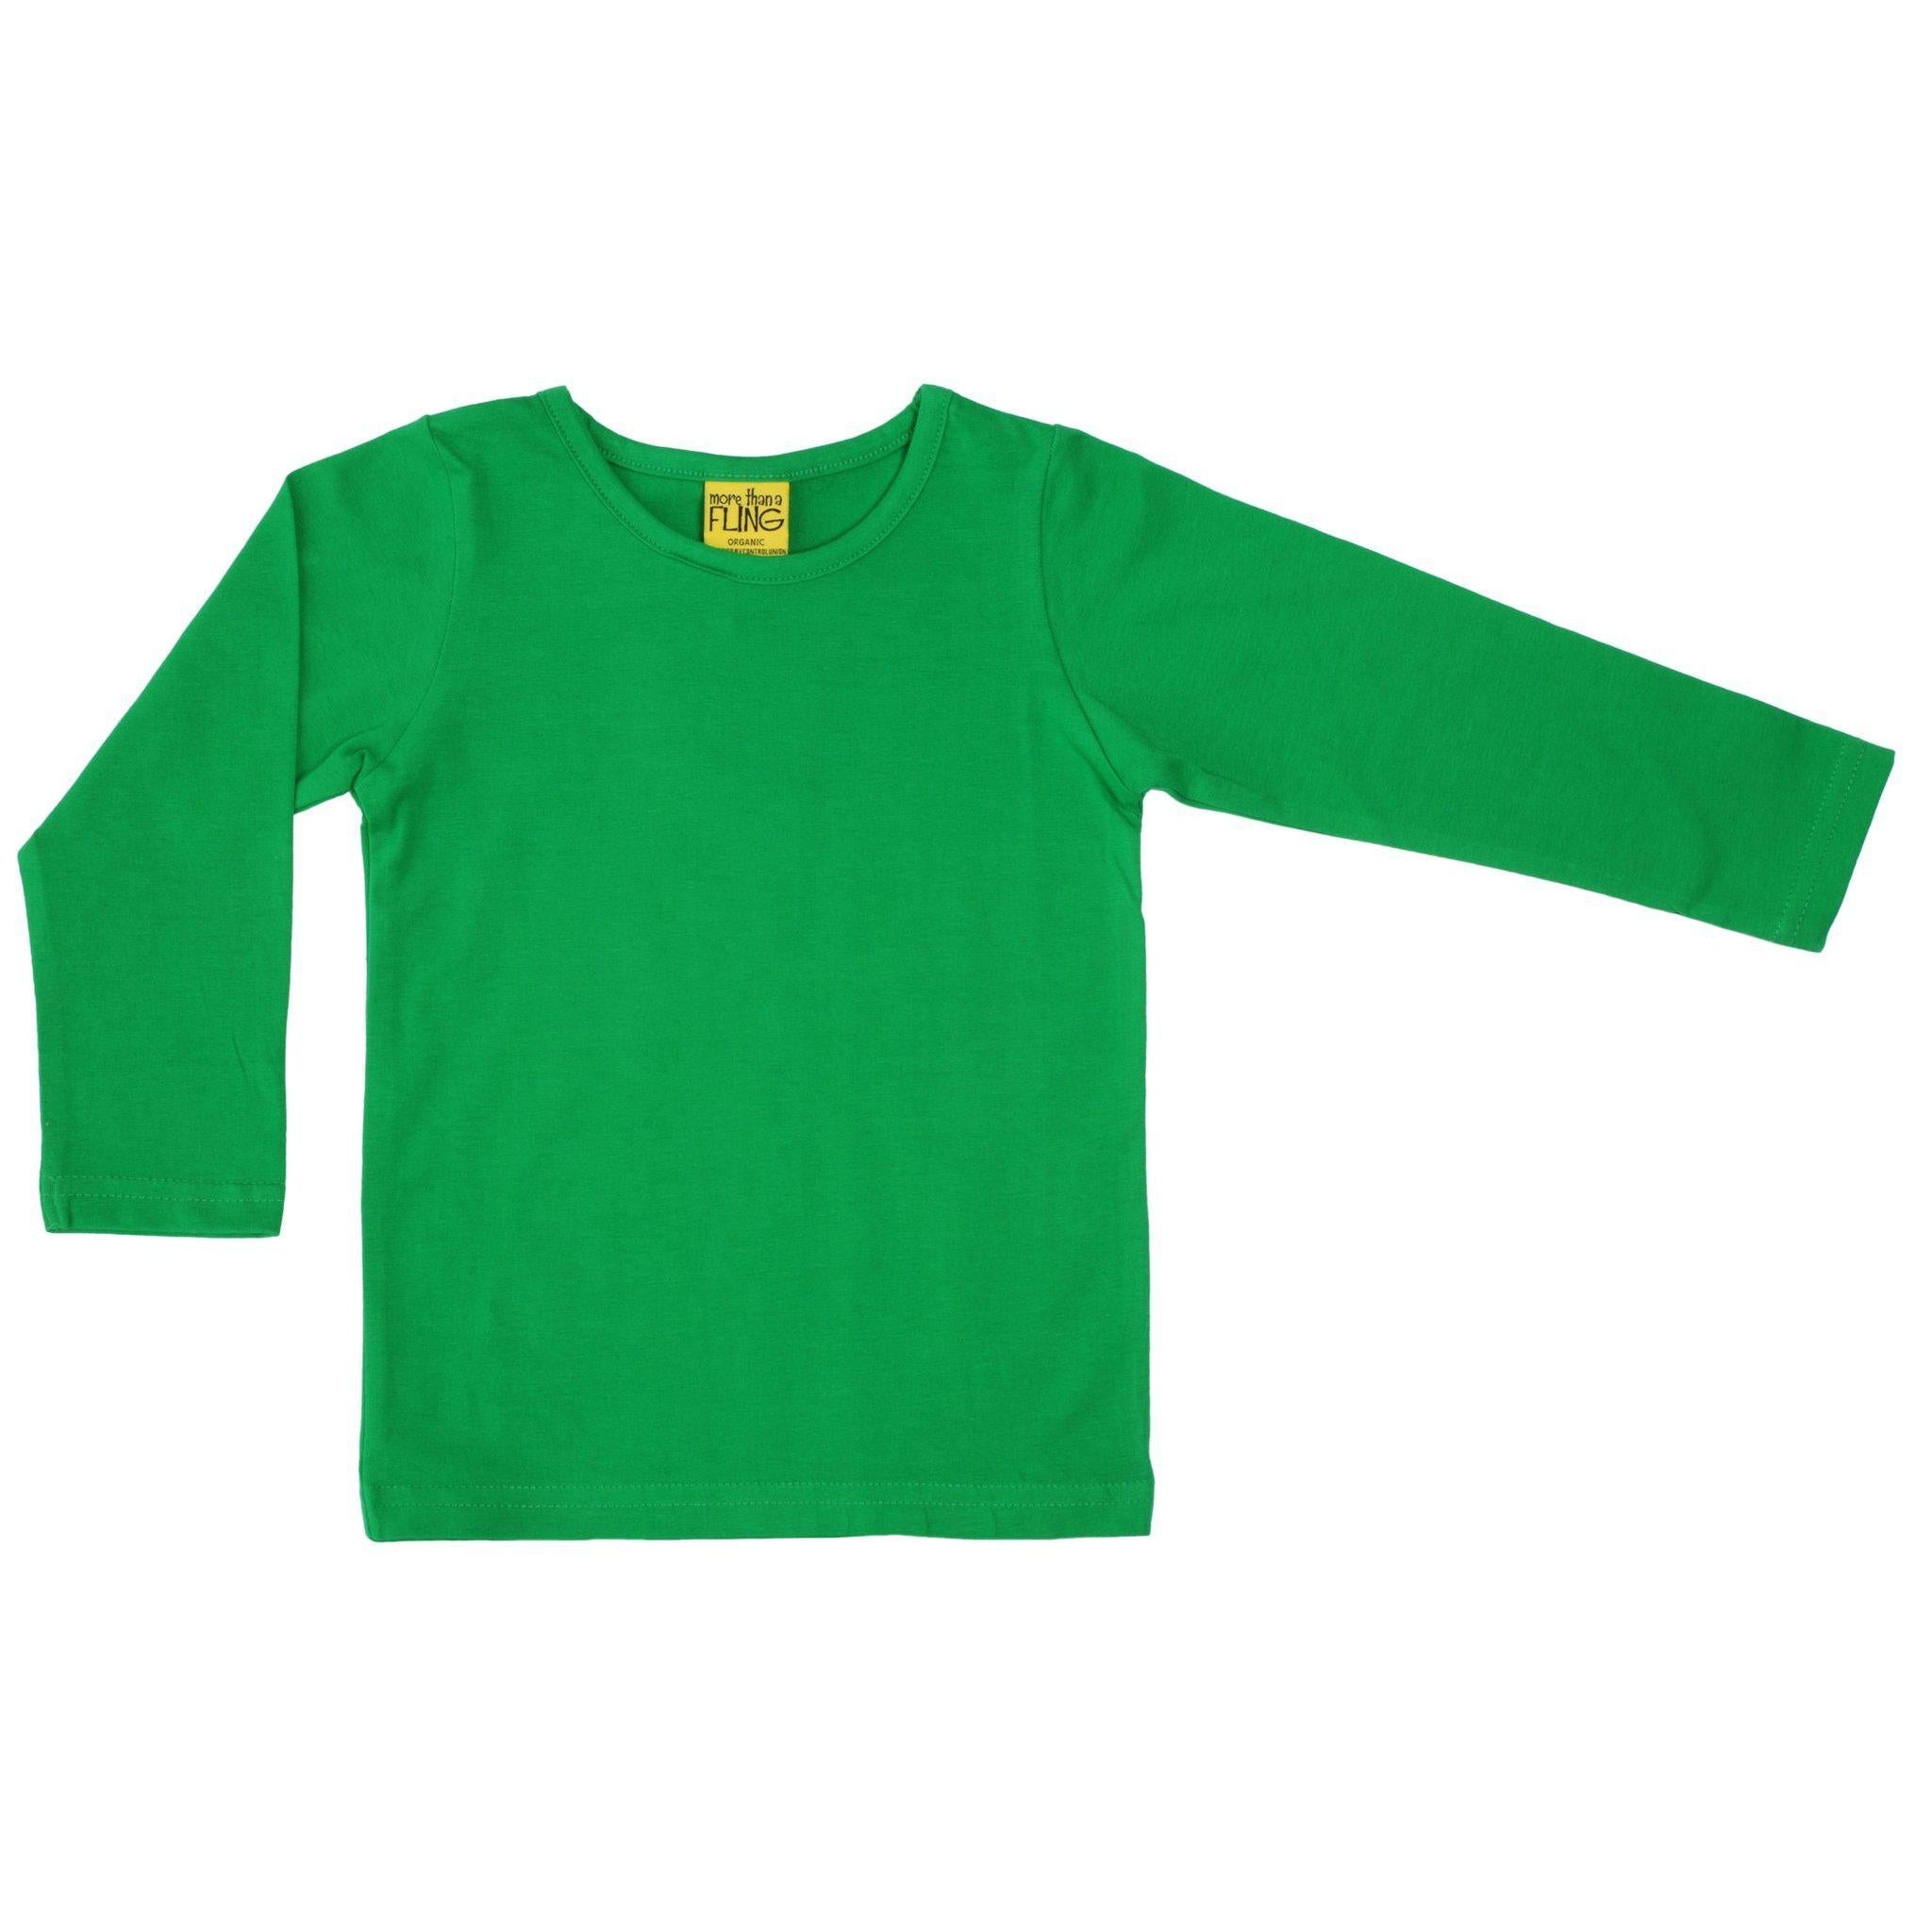 More than a Fling - Green Womens Long Sleeved Top (Small)